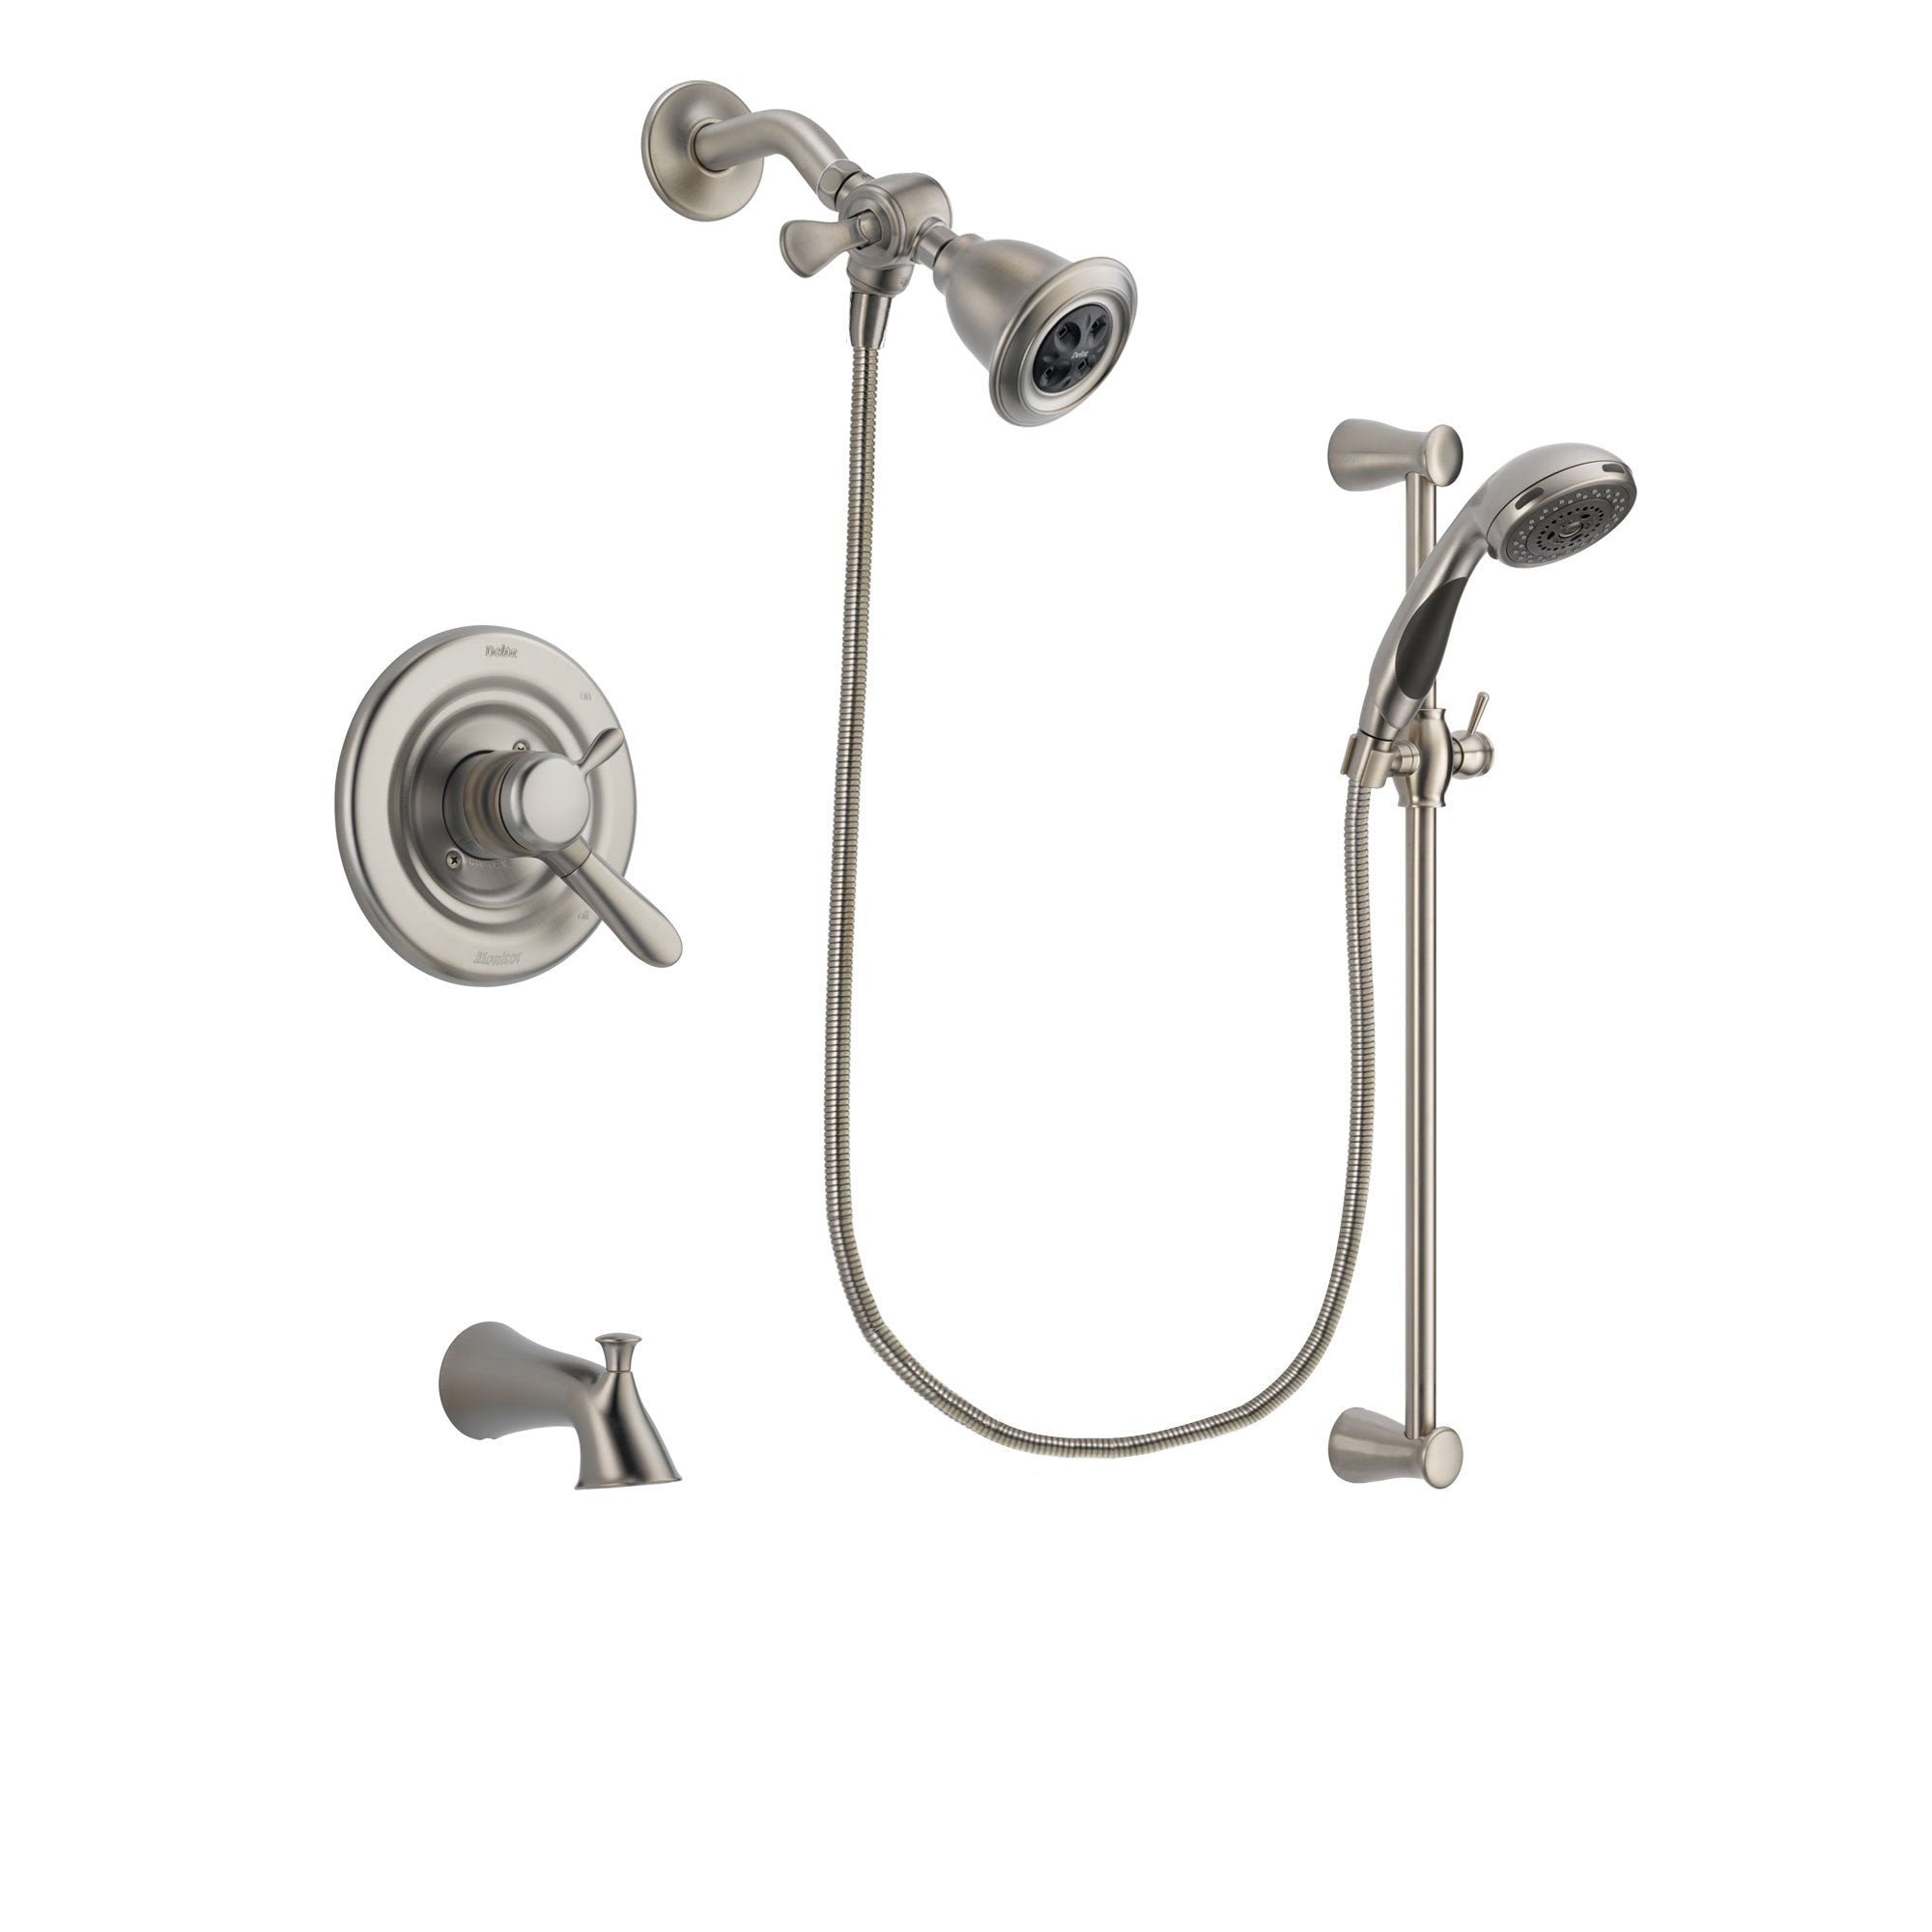 Delta Lahara Stainless Steel Finish Dual Control Tub and Shower Faucet System Package with Water Efficient Showerhead and Handheld Shower Spray with Slide Bar Includes Rough-in Valve and Tub Spout DSP1567V